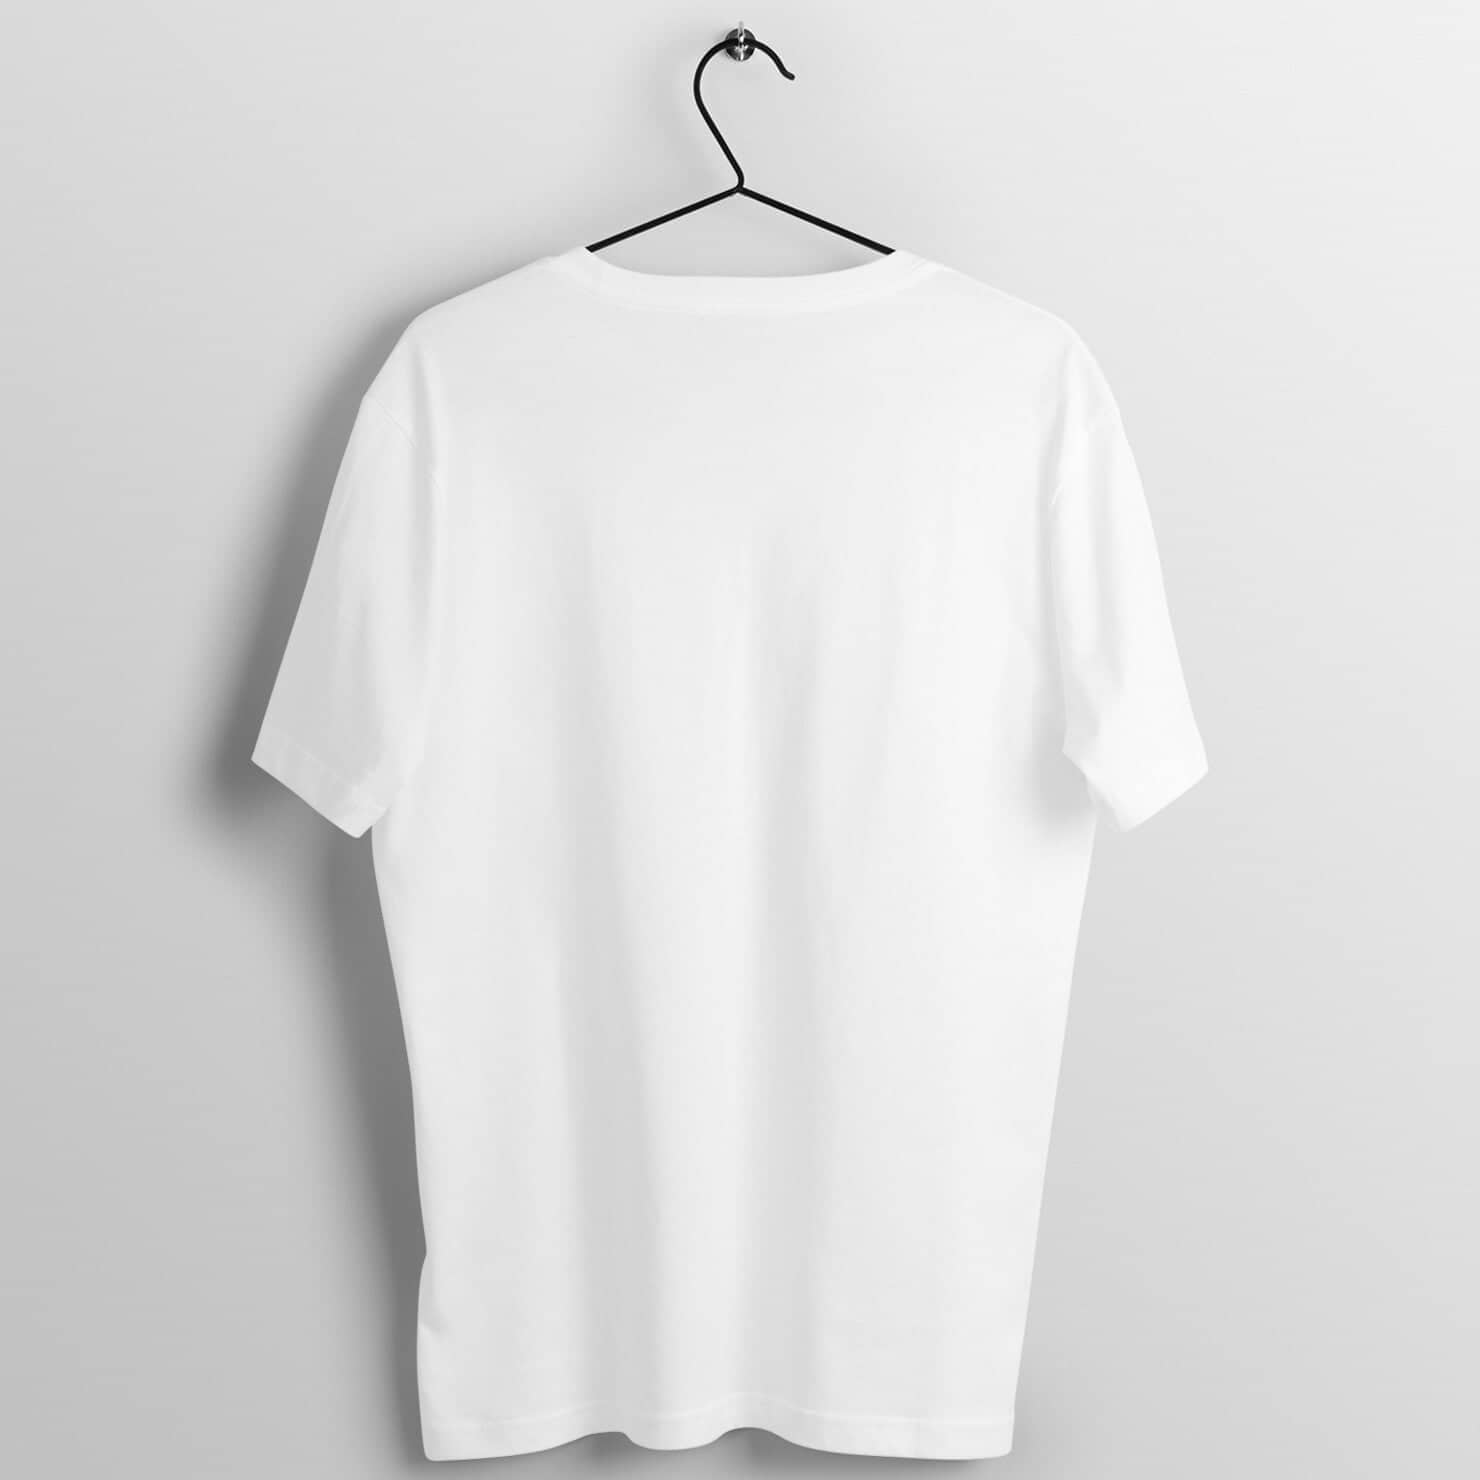 Promoted to Bua Est. 2022 Special White T Shirt for Women Shirts & Tops Printrove 